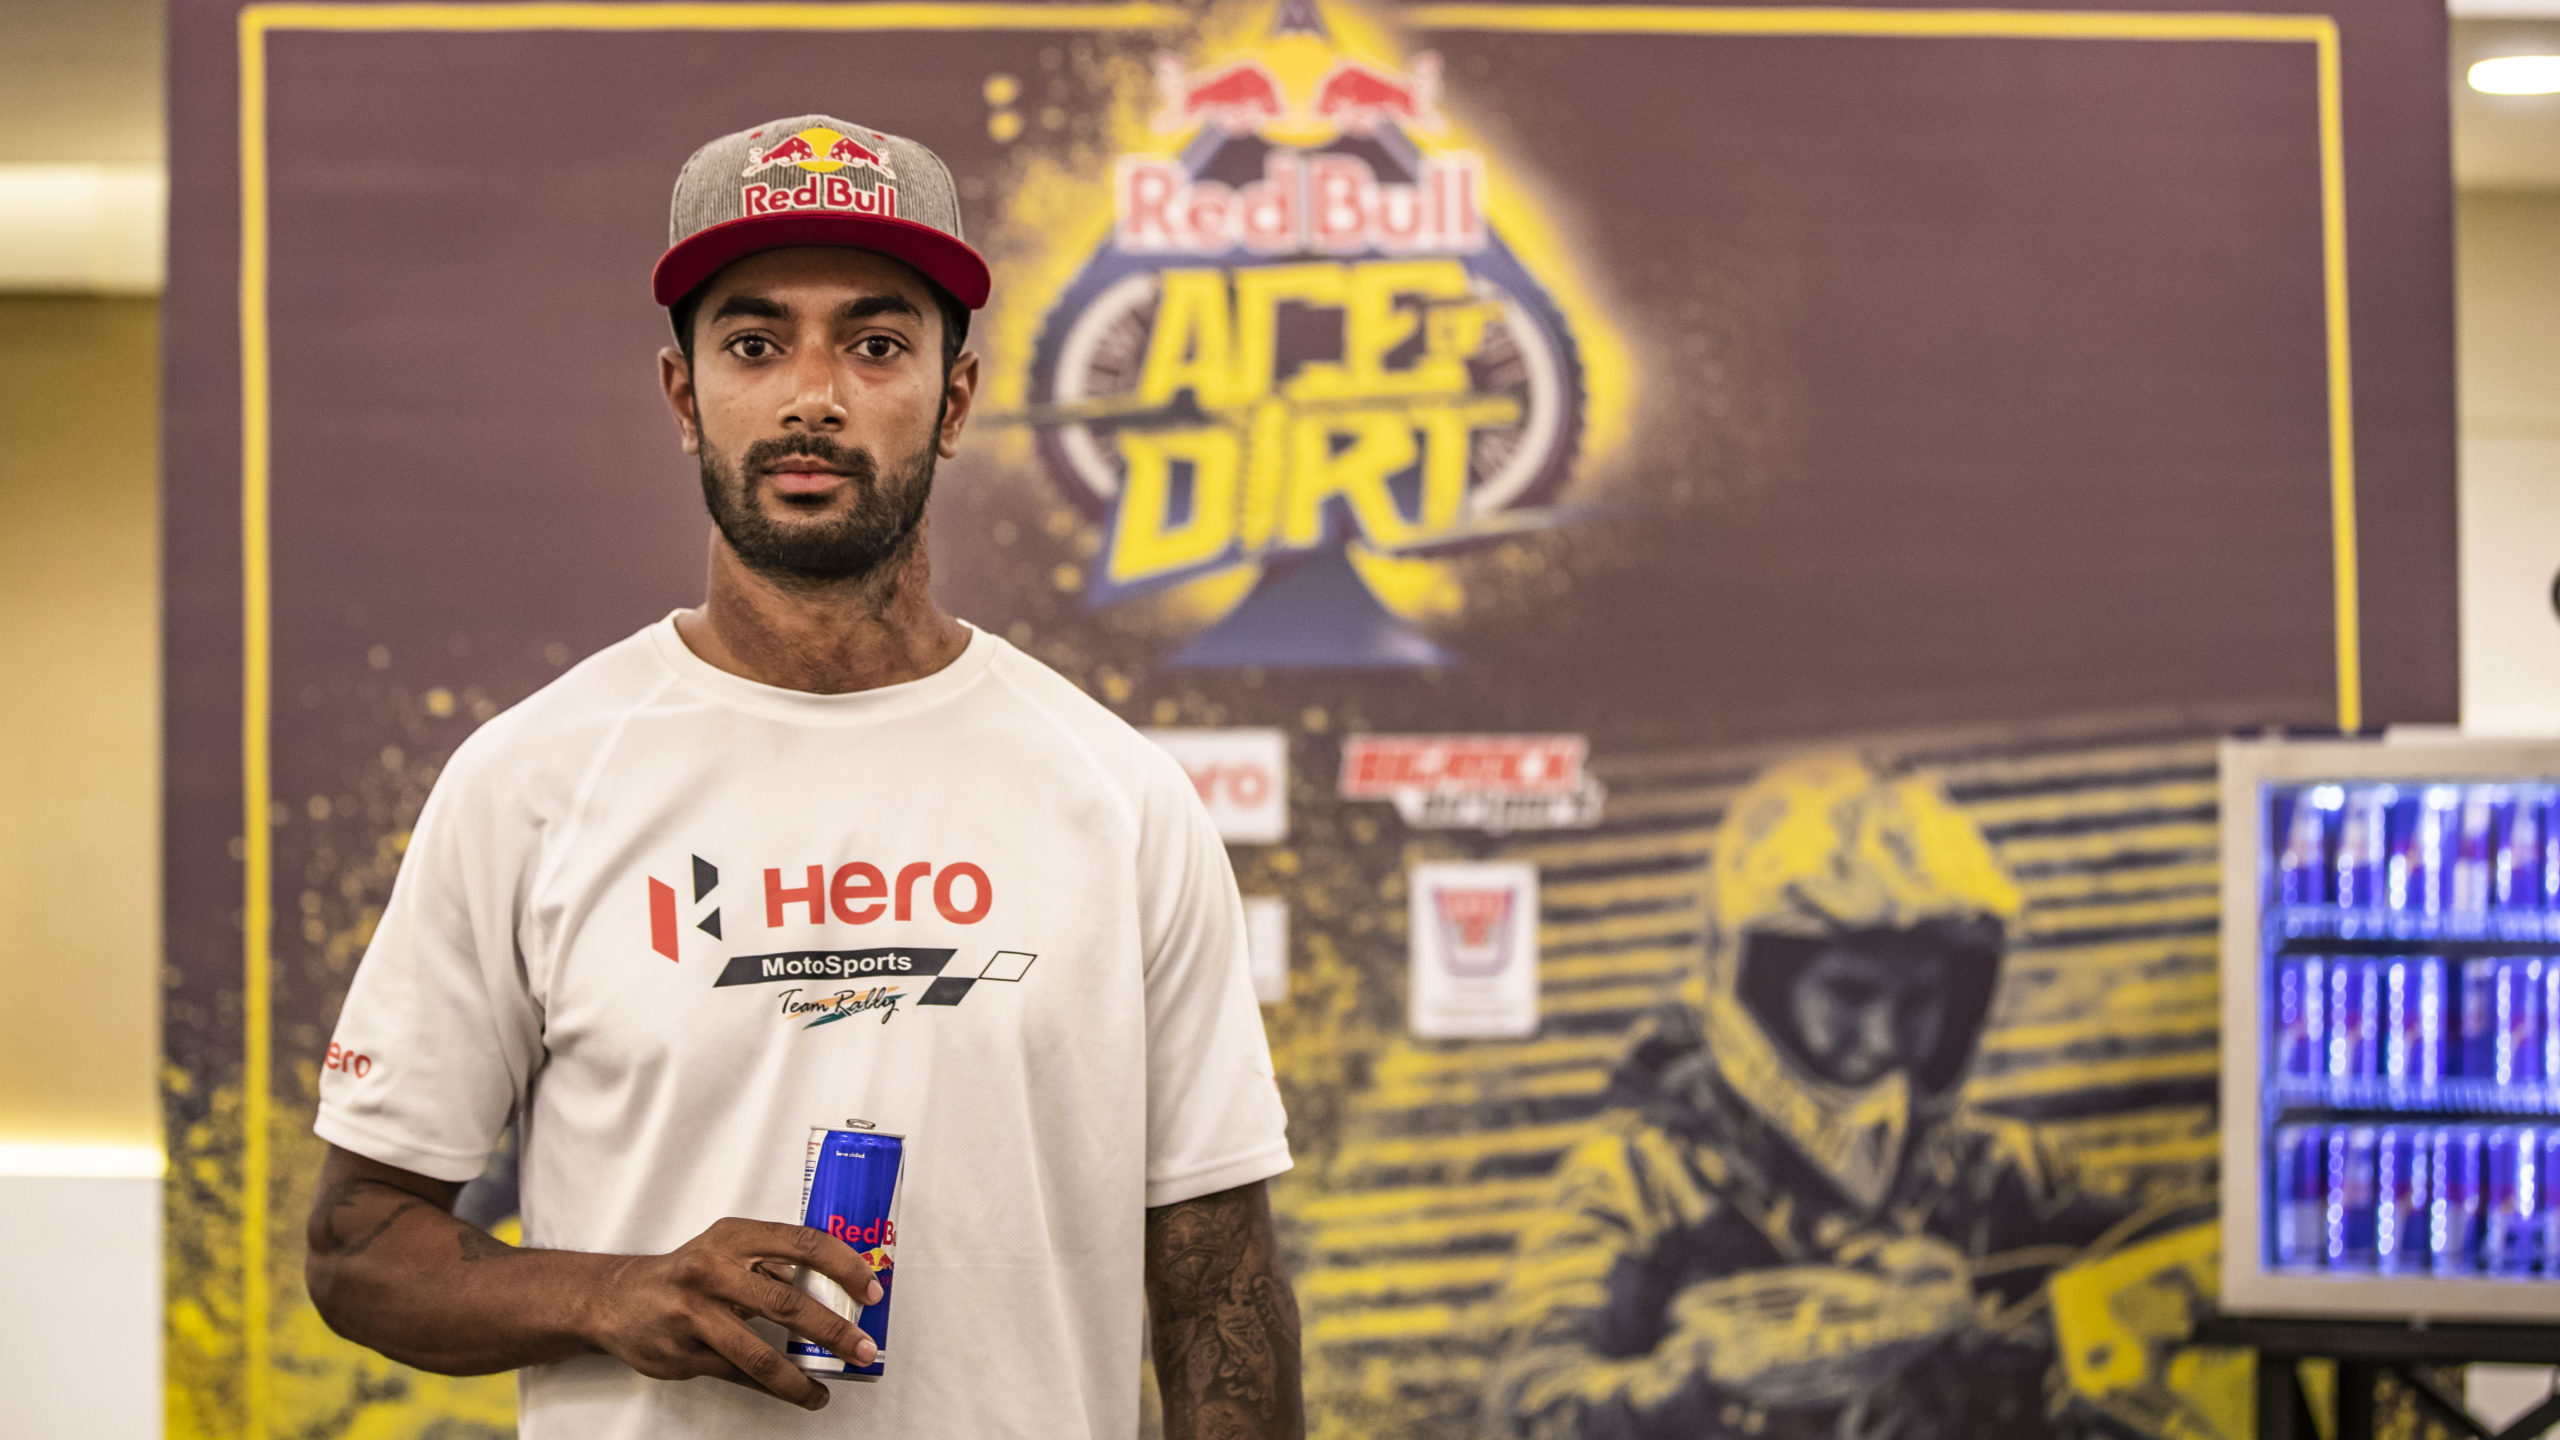 Photo of Red Bull Ace of Dirt event, a first in India: Red Bull athlete CS Santosh on show at Kolar